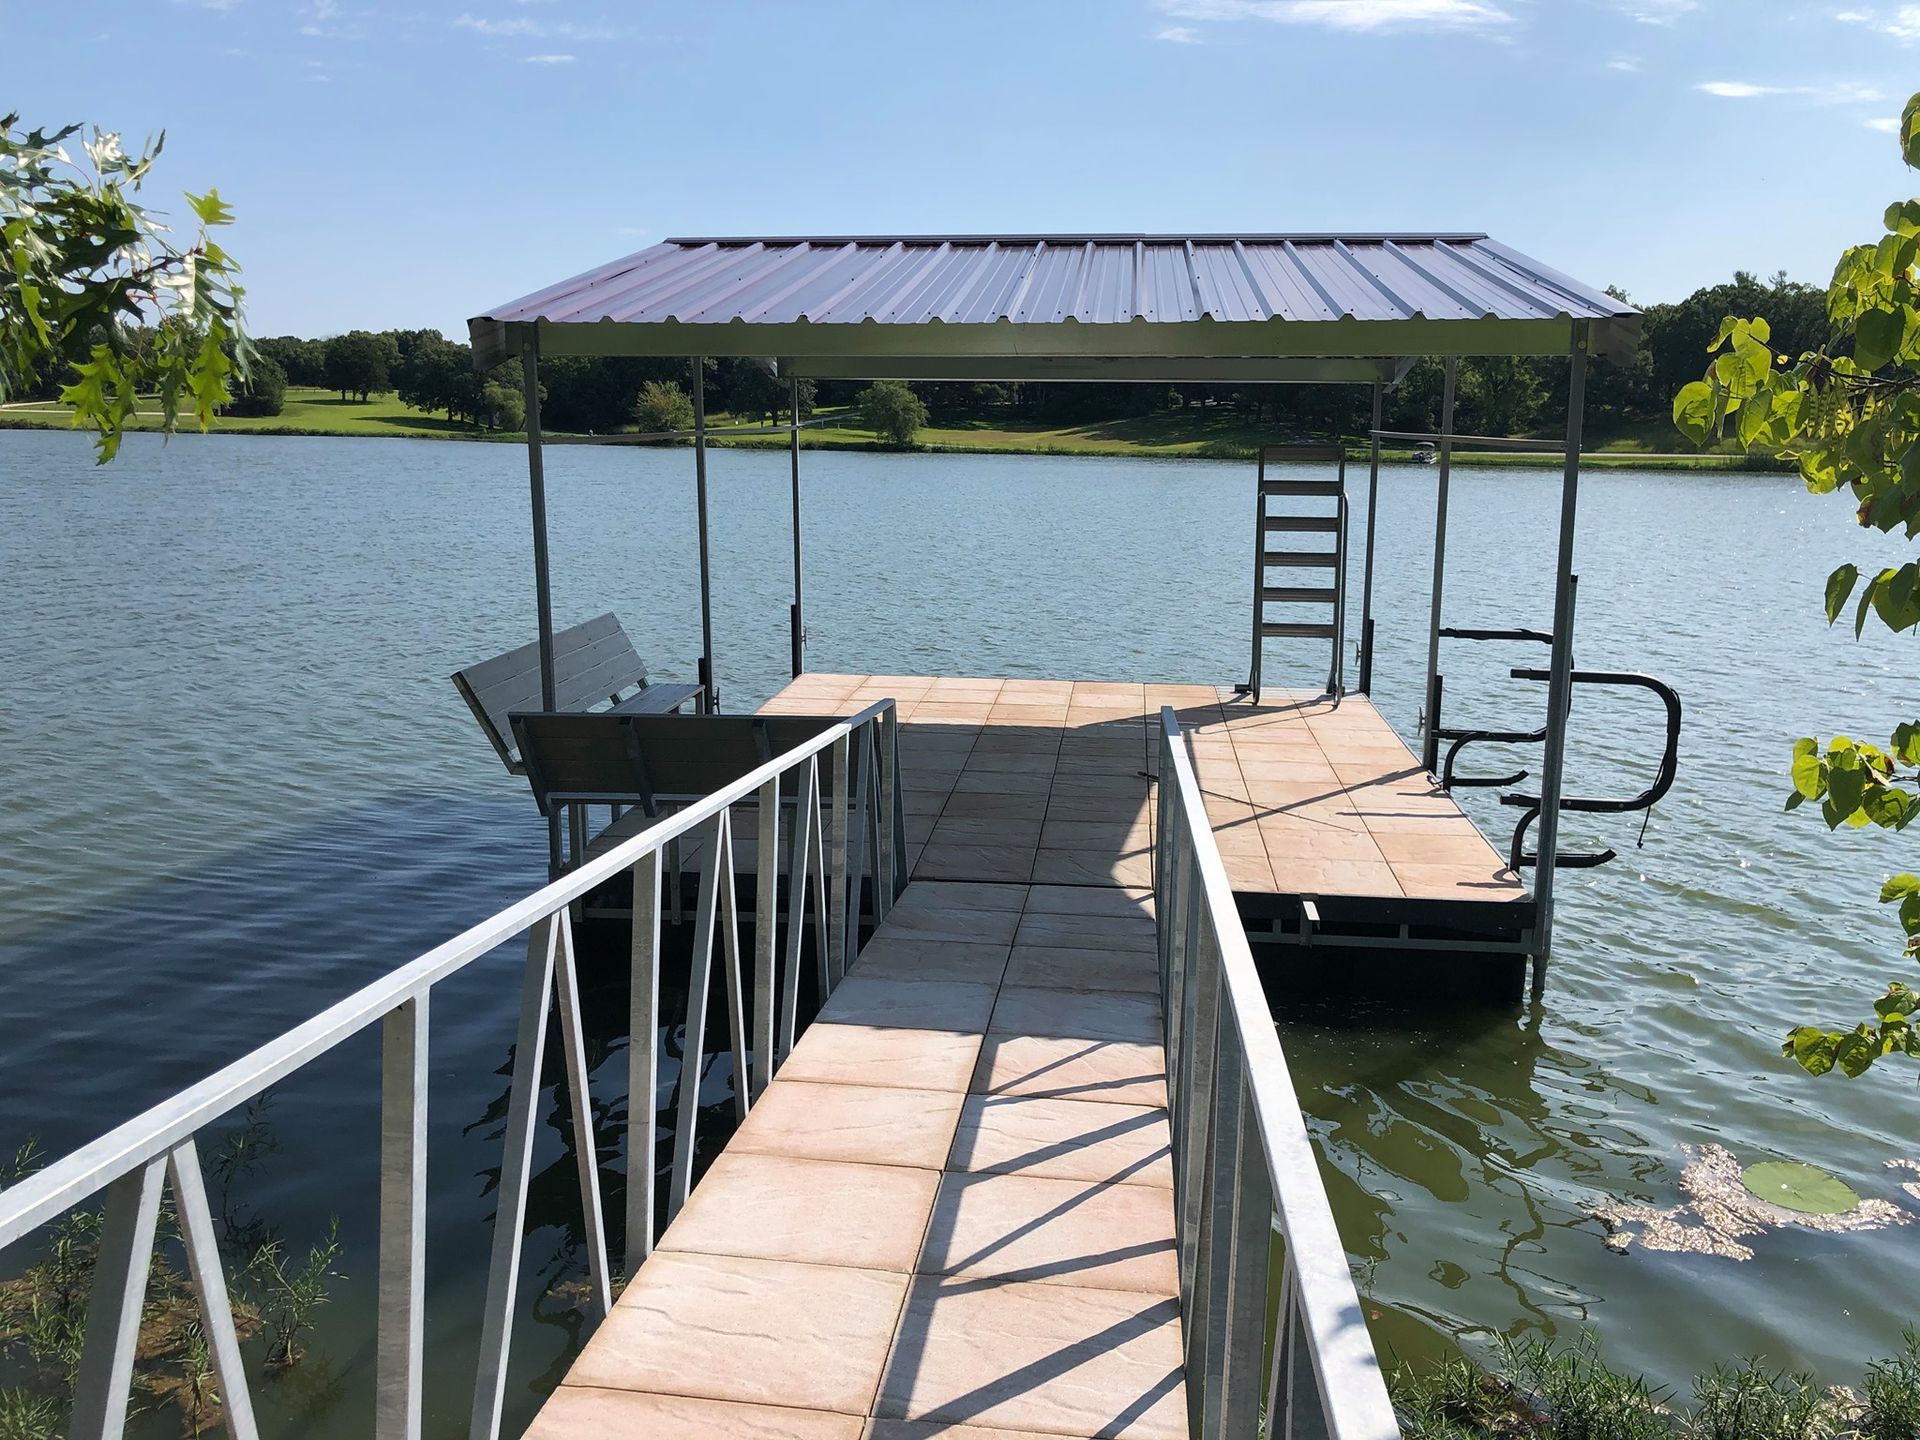 Choose Mac’s Docks to Professionally Install Your Custom Dock in the Midwest.